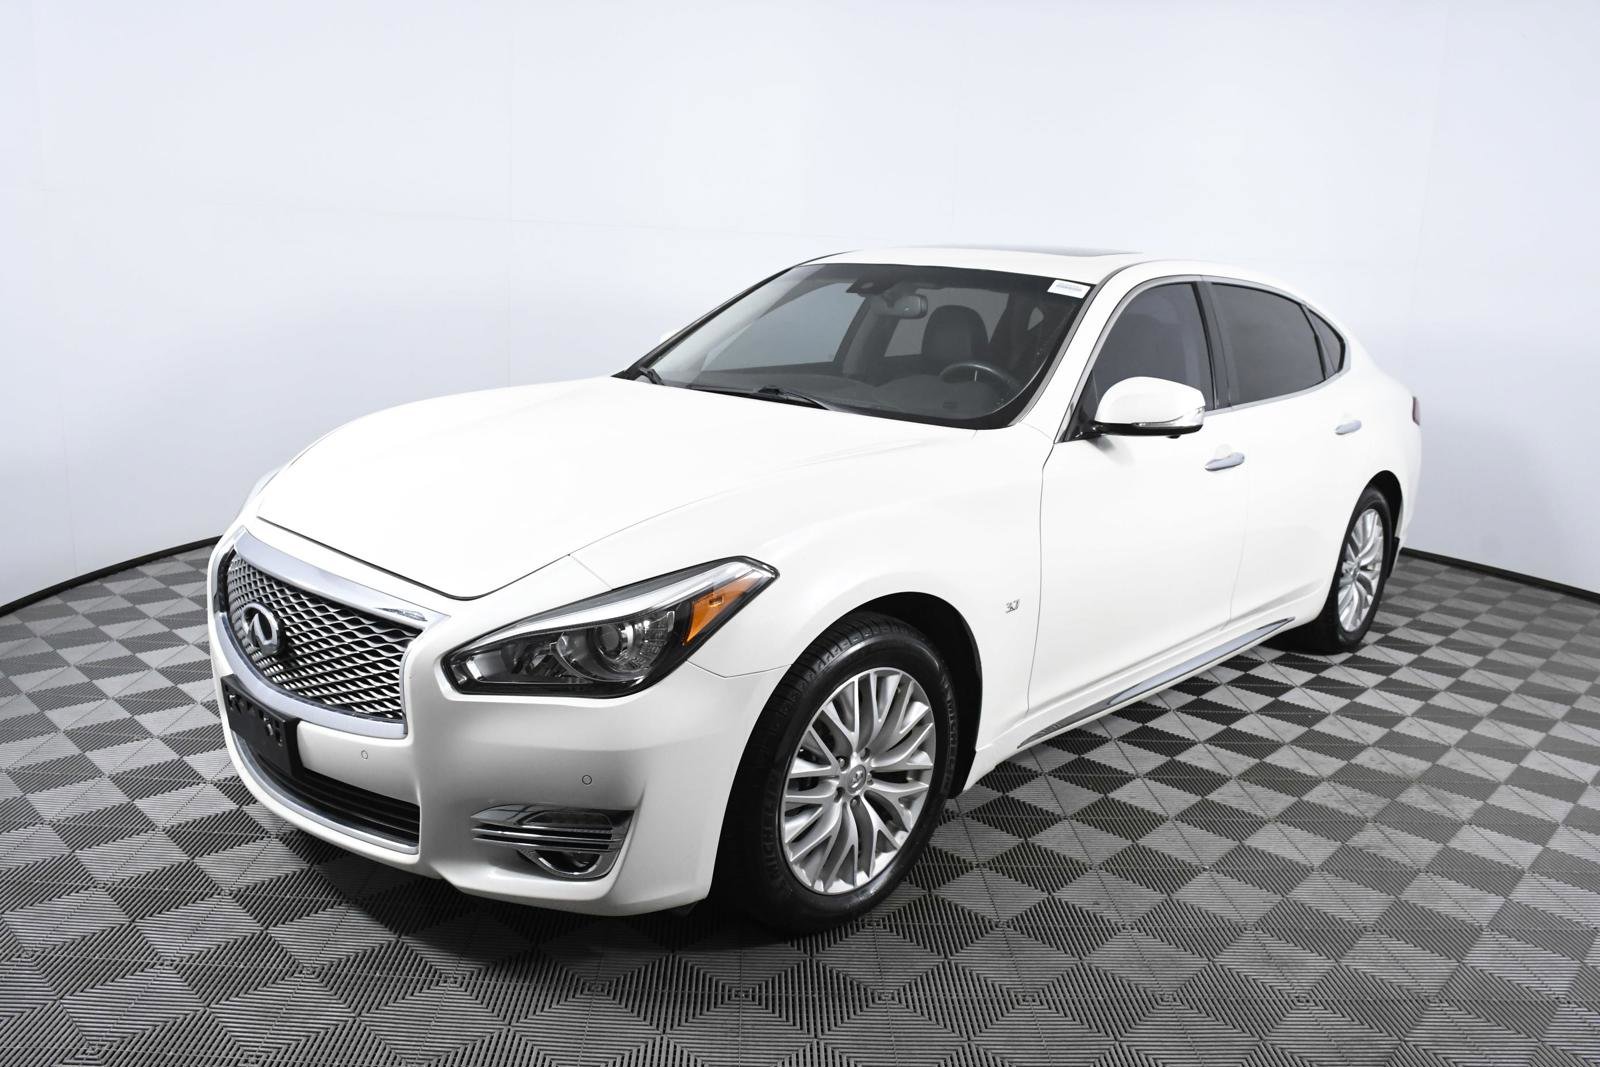 Pre-Owned 2019 INFINITI Q70L 3.7 4dr Car in Palmetto Bay #M685482 | HGreg  Nissan Kendall